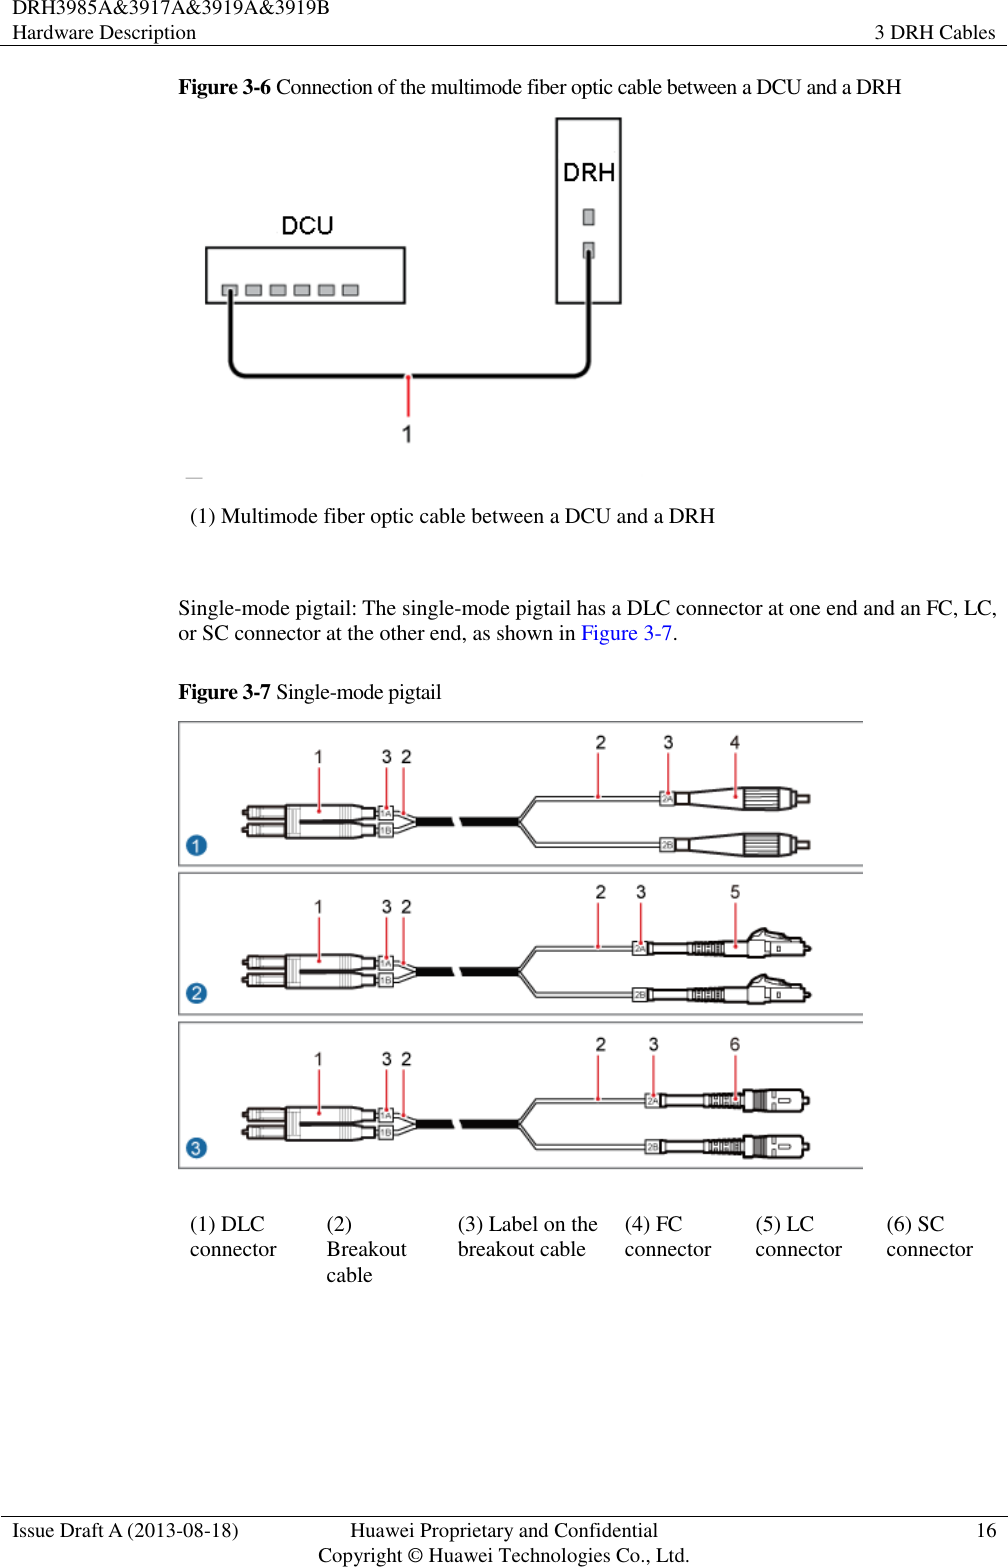 DRH3985A&amp;3917A&amp;3919A&amp;3919B Hardware Description 3 DRH Cables  Issue Draft A (2013-08-18) Huawei Proprietary and Confidential                                     Copyright © Huawei Technologies Co., Ltd. 16  Figure 3-6 Connection of the multimode fiber optic cable between a DCU and a DRH  (1) Multimode fiber optic cable between a DCU and a DRH  Single-mode pigtail: The single-mode pigtail has a DLC connector at one end and an FC, LC, or SC connector at the other end, as shown in Figure 3-7. Figure 3-7 Single-mode pigtail  (1) DLC connector (2) Breakout cable (3) Label on the breakout cable (4) FC connector (5) LC connector (6) SC connector  